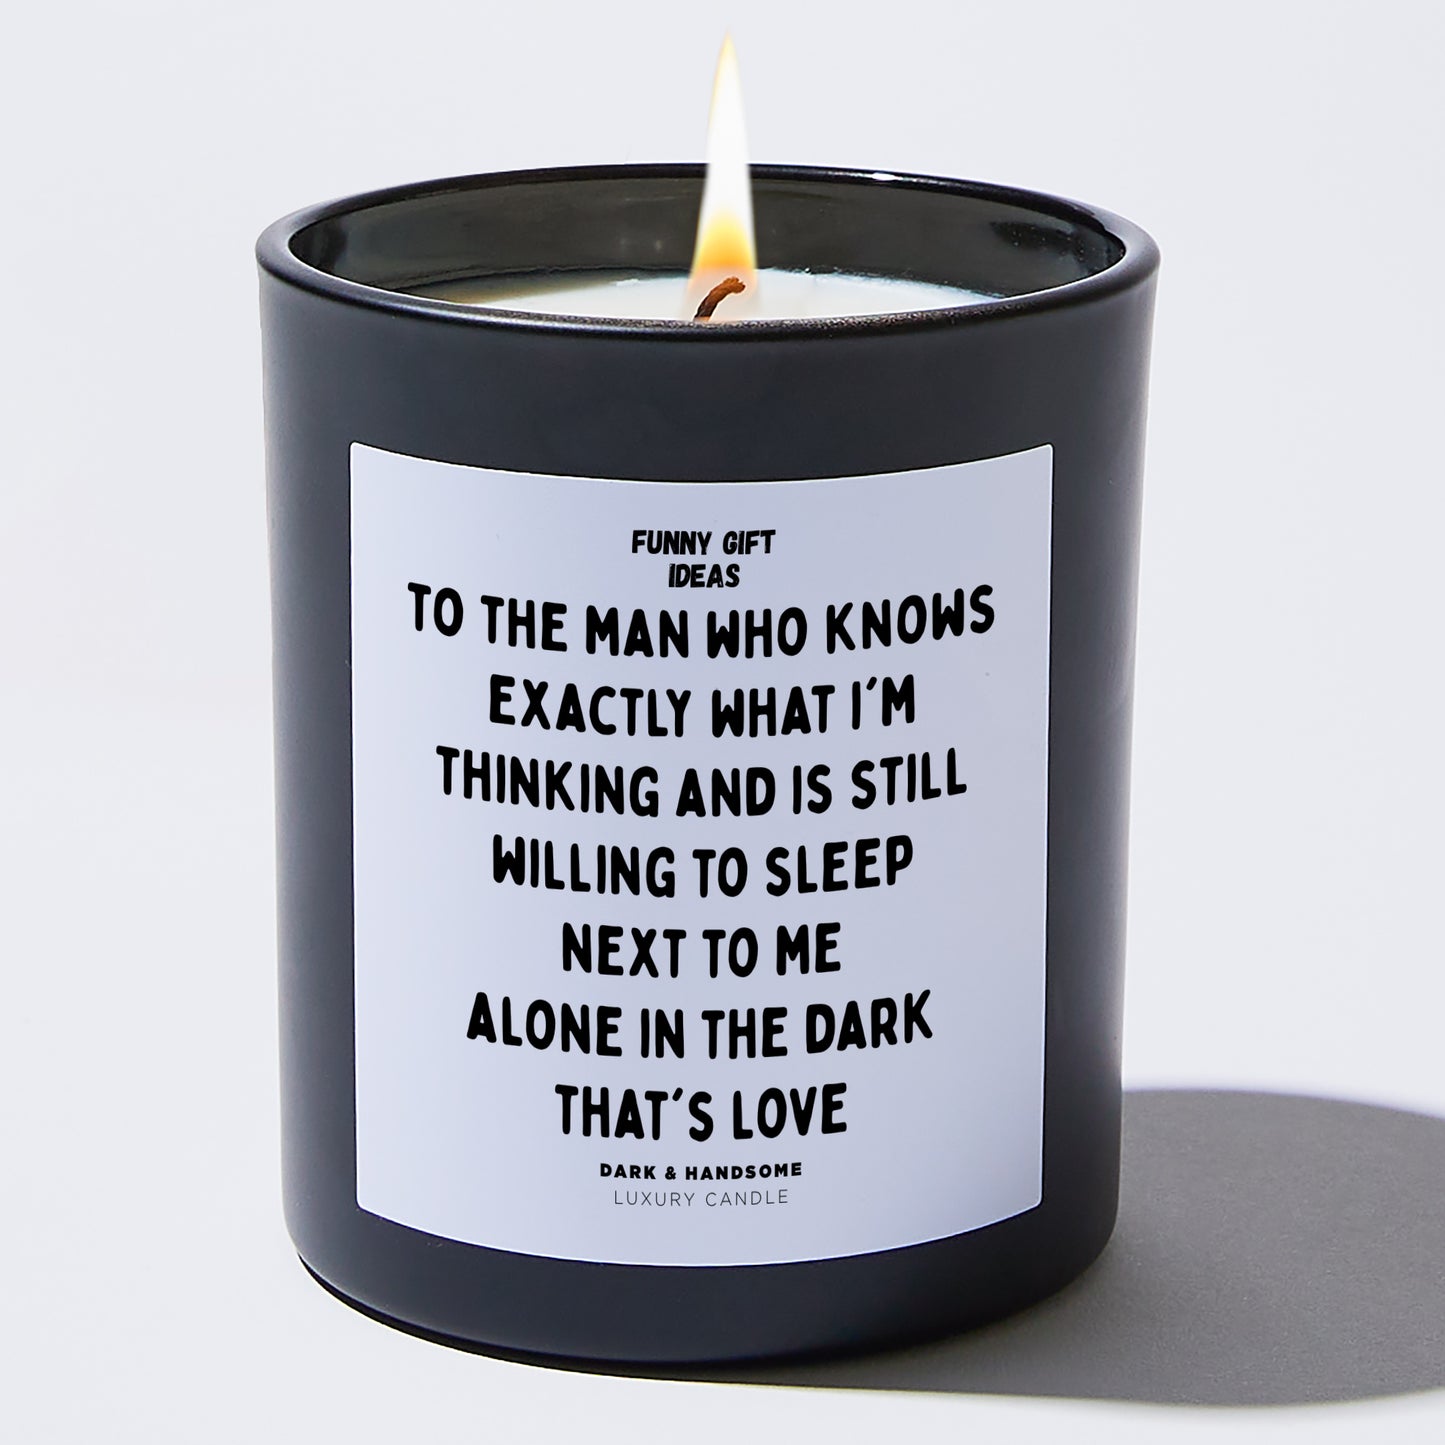 Anniversary Present - To the Man Who Knows Exactly What I'm Thinking and is Still Willing to Sleep Next to Me. Alone. In the Dark. That's Love - Candle